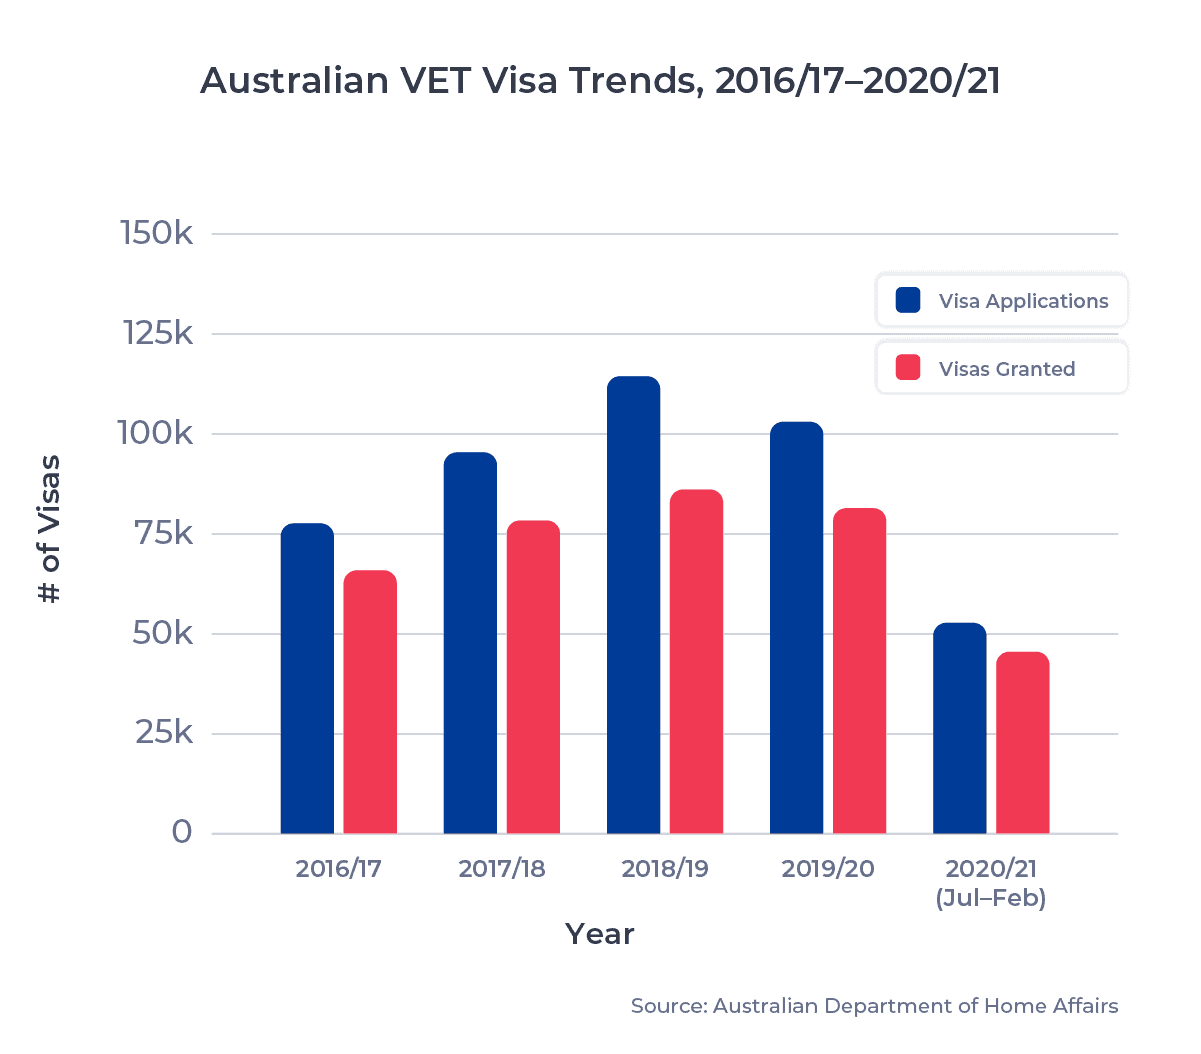 Australia VET Visa Trends vertical bar graph, showing # of visas issued from 2016/17 to 2020/21